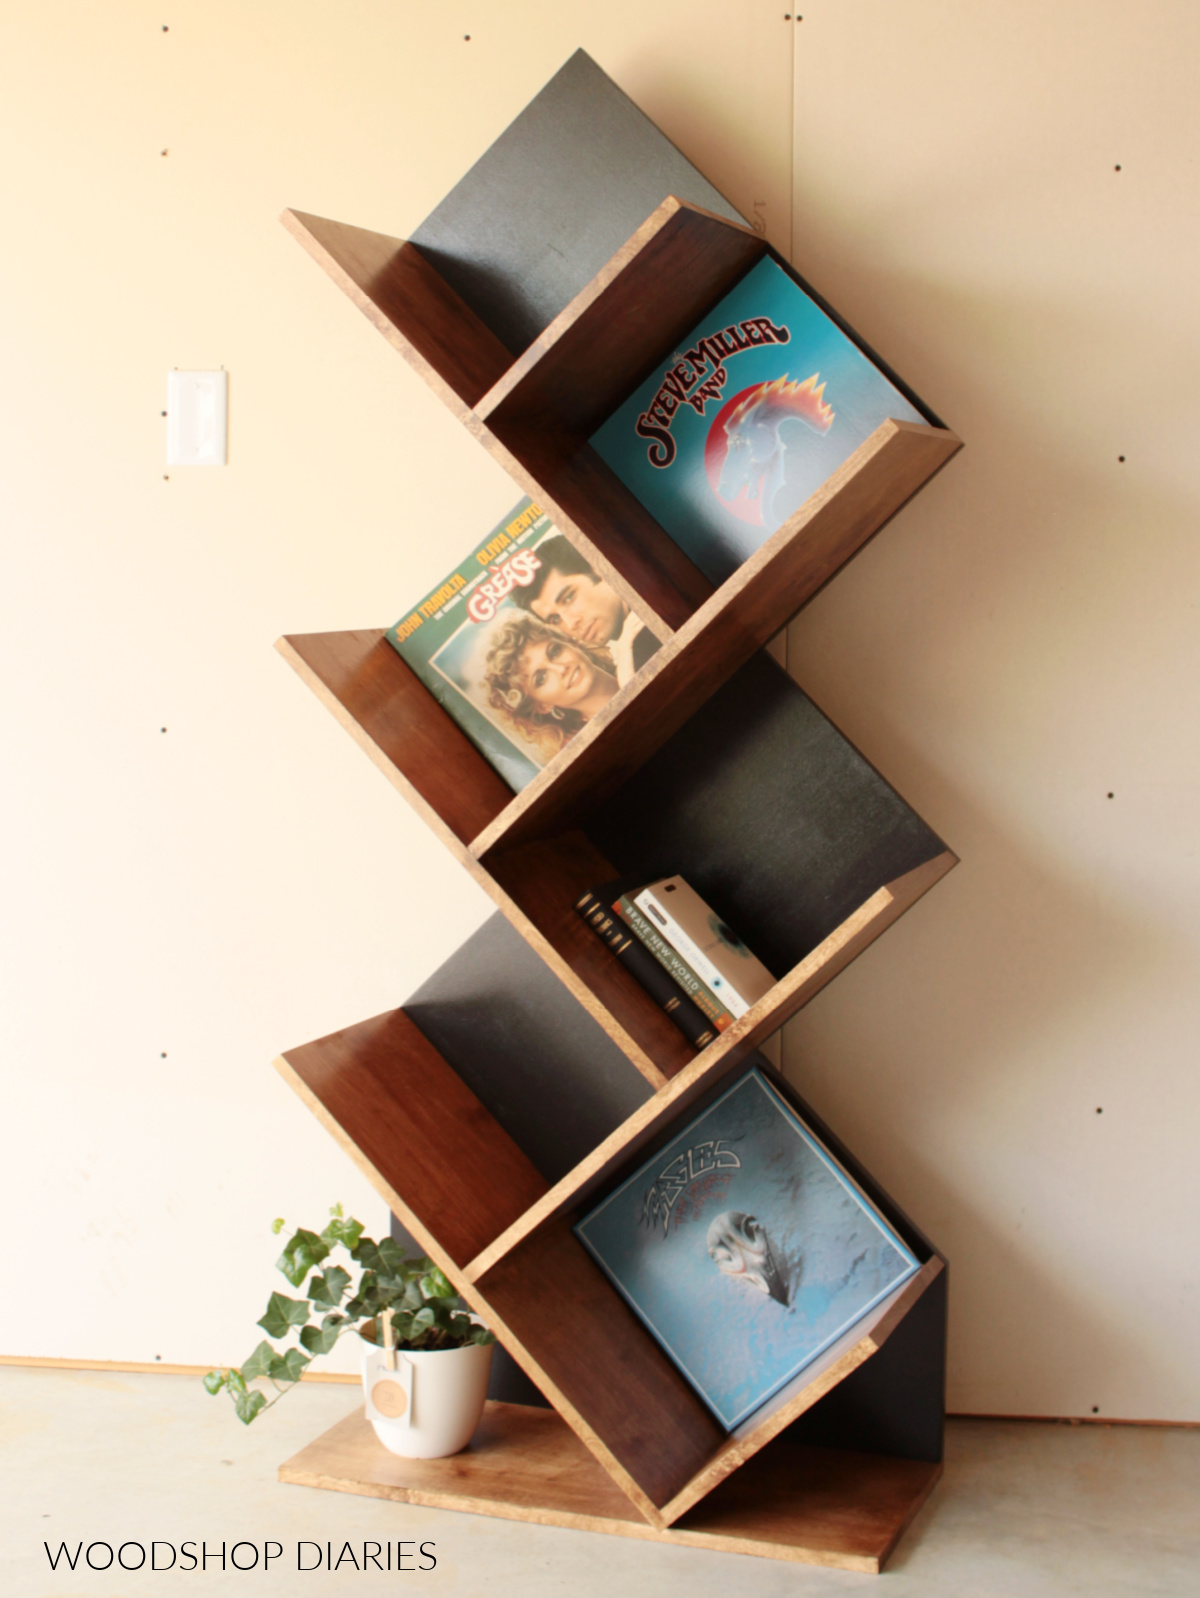 Vinyl Record Wall Storage Racks : 6 Steps (with Pictures) - Instructables